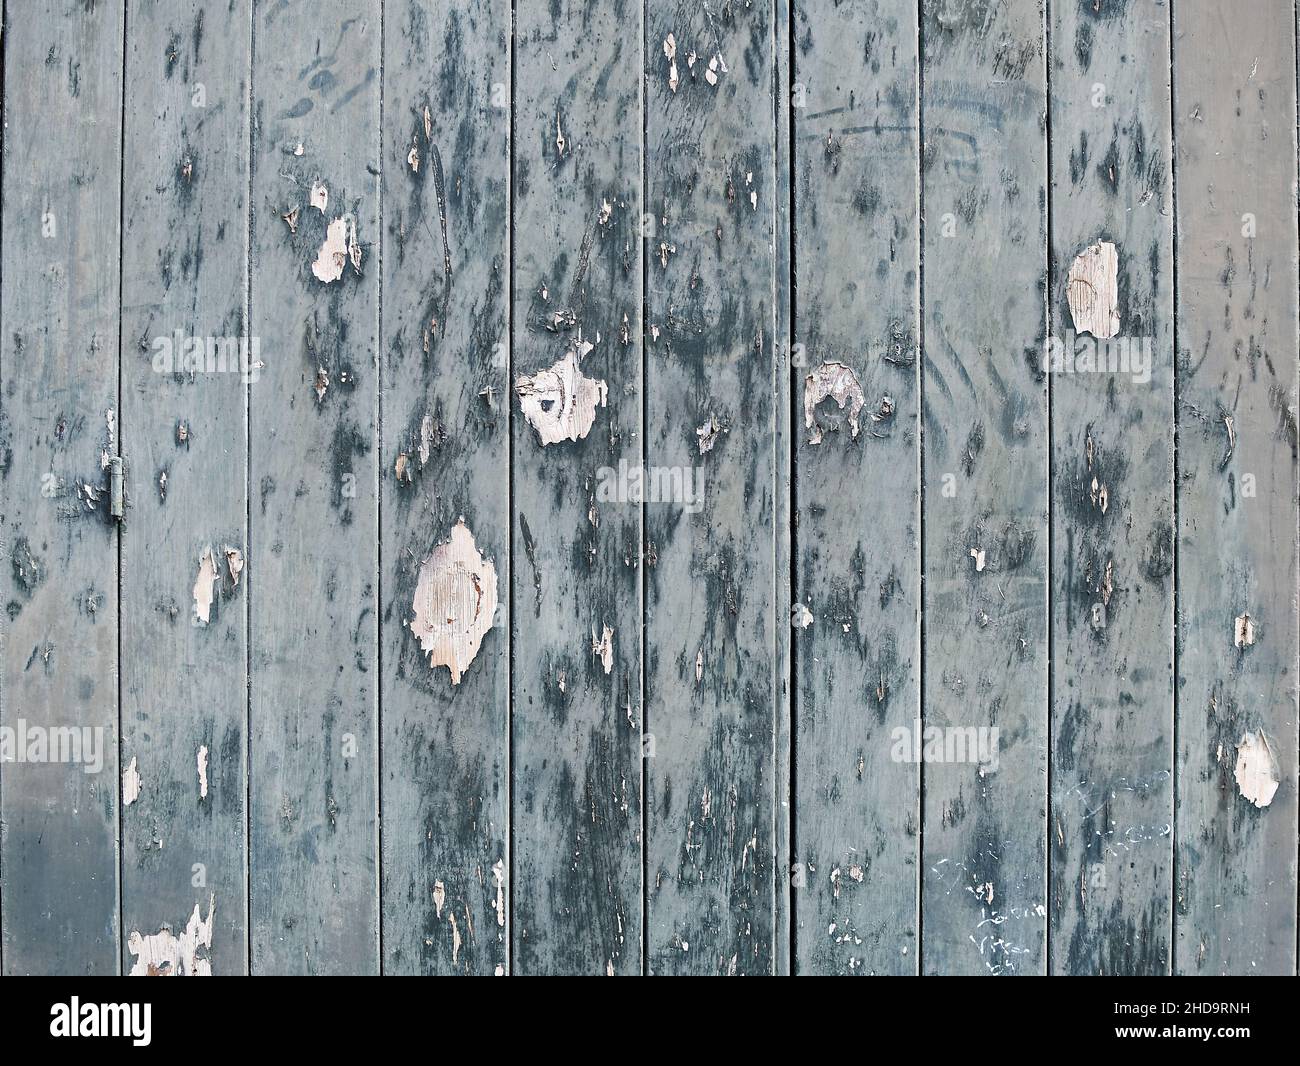 Rustic wood slats background Stock Photo by ©nito103 72363905